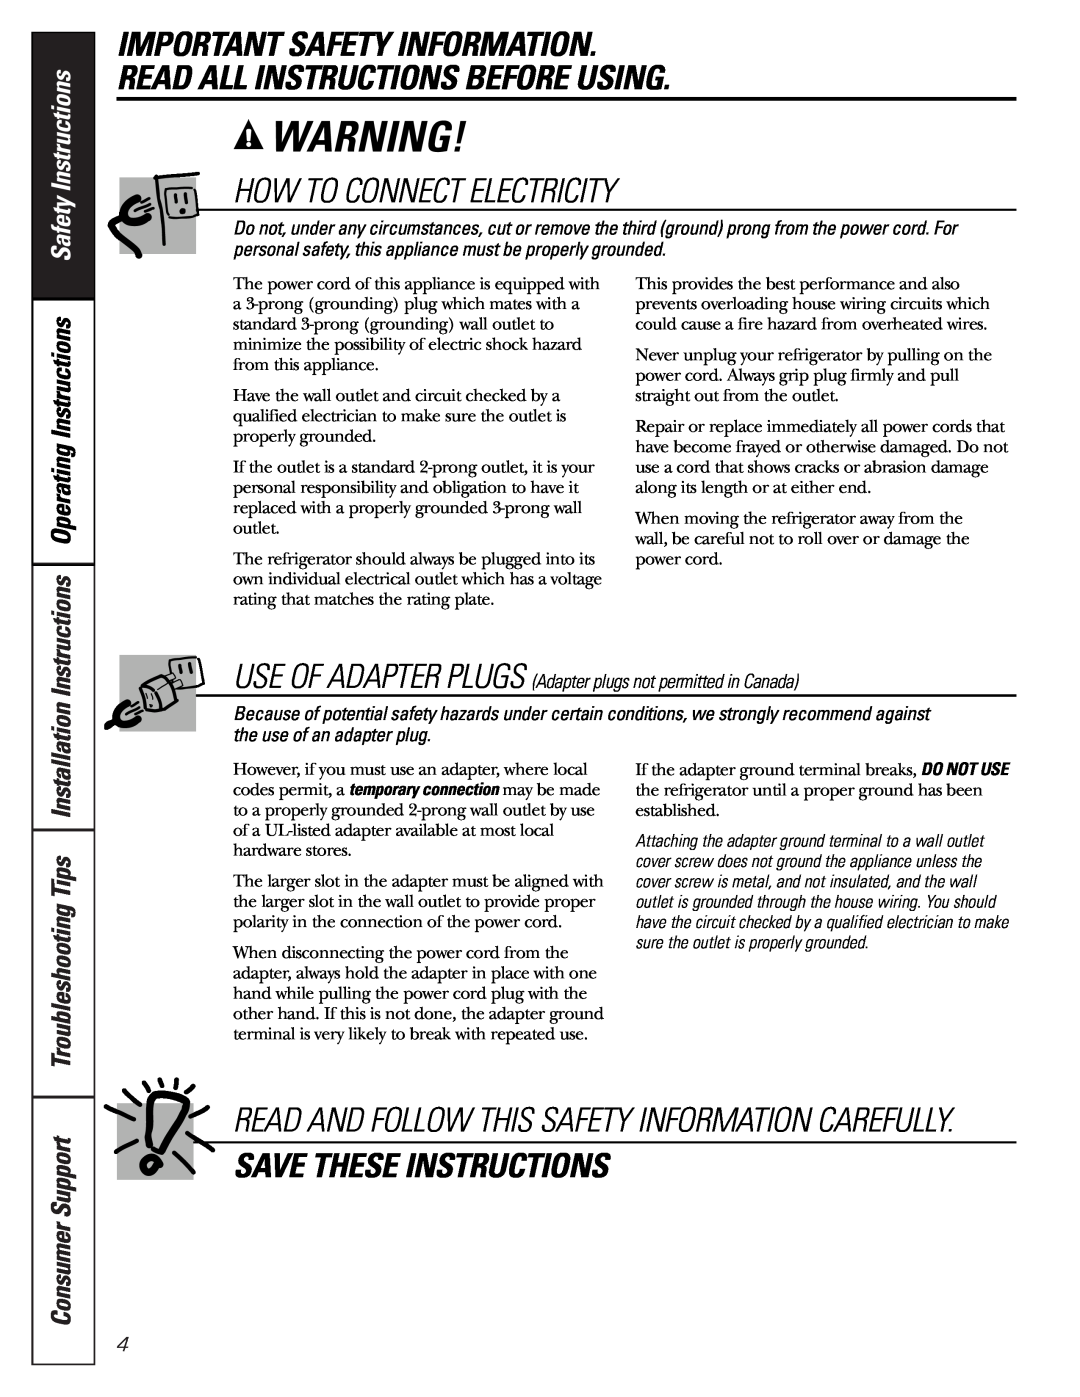 GE 197D3351P003 How To Connect Electricity, Save These Instructions, Troubleshooting Tips, Consumer Support 